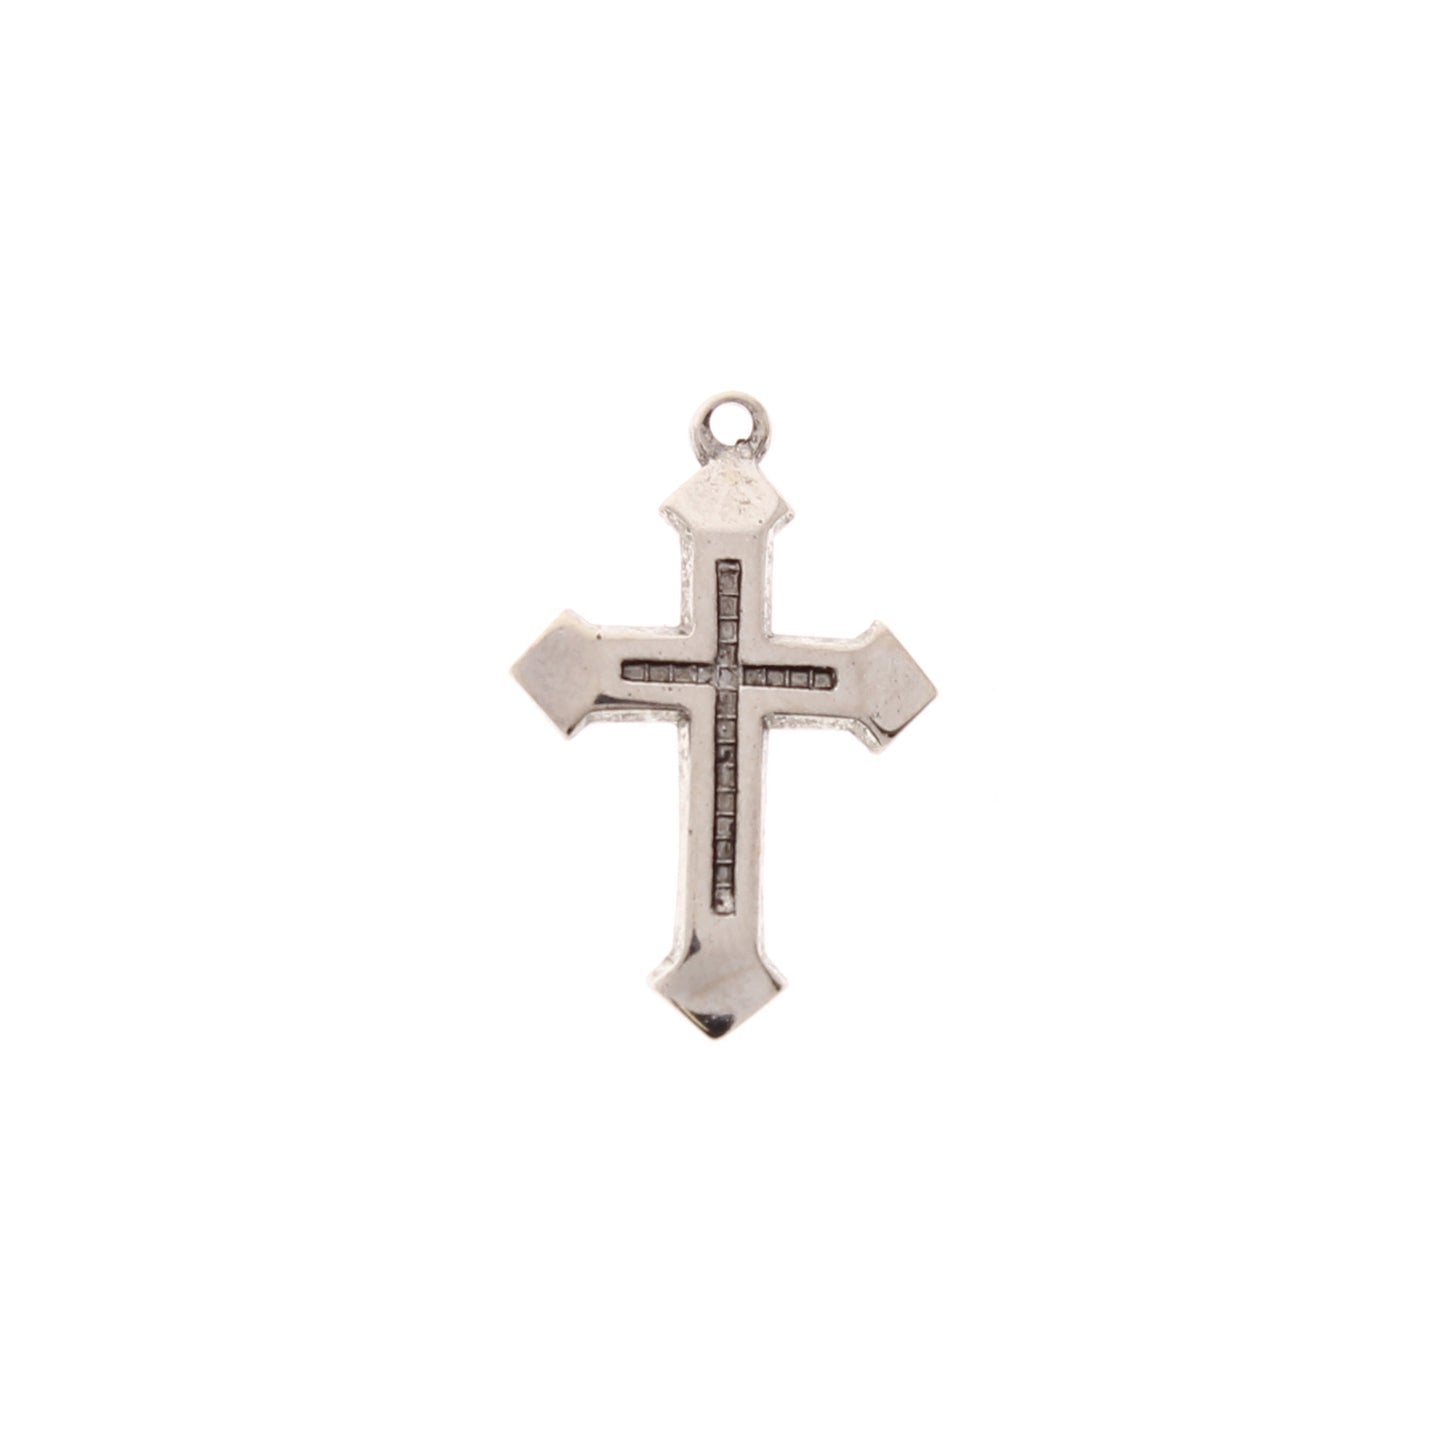 21mm x 16mm Coptic Cross Charms, Antique Silver, pack of 6